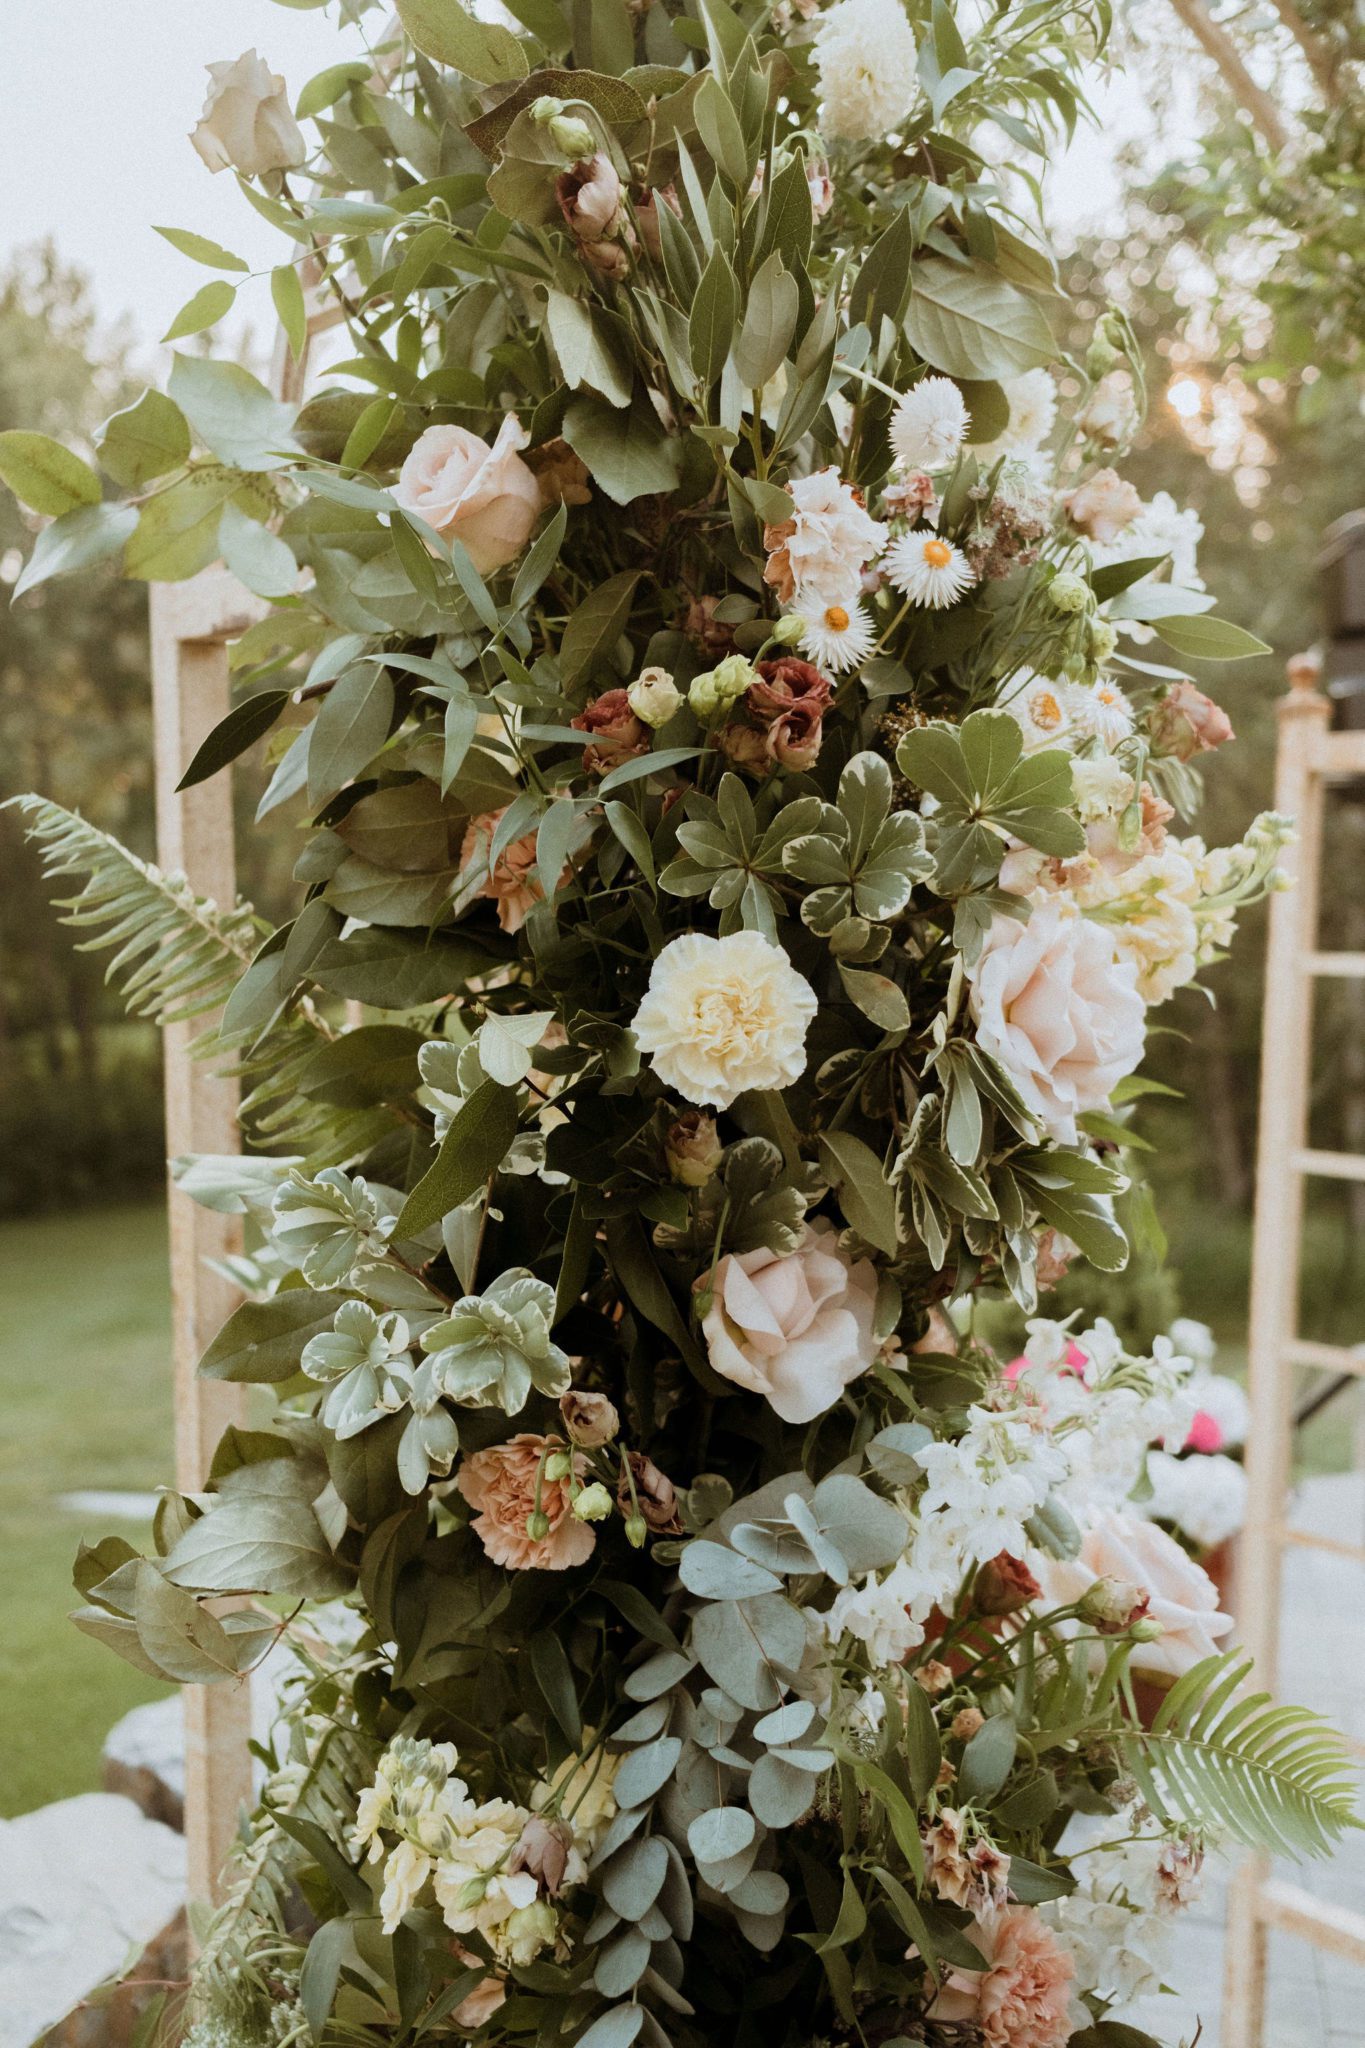 Dramatic floral arch with dusty pink roses at outdoor summer wedding